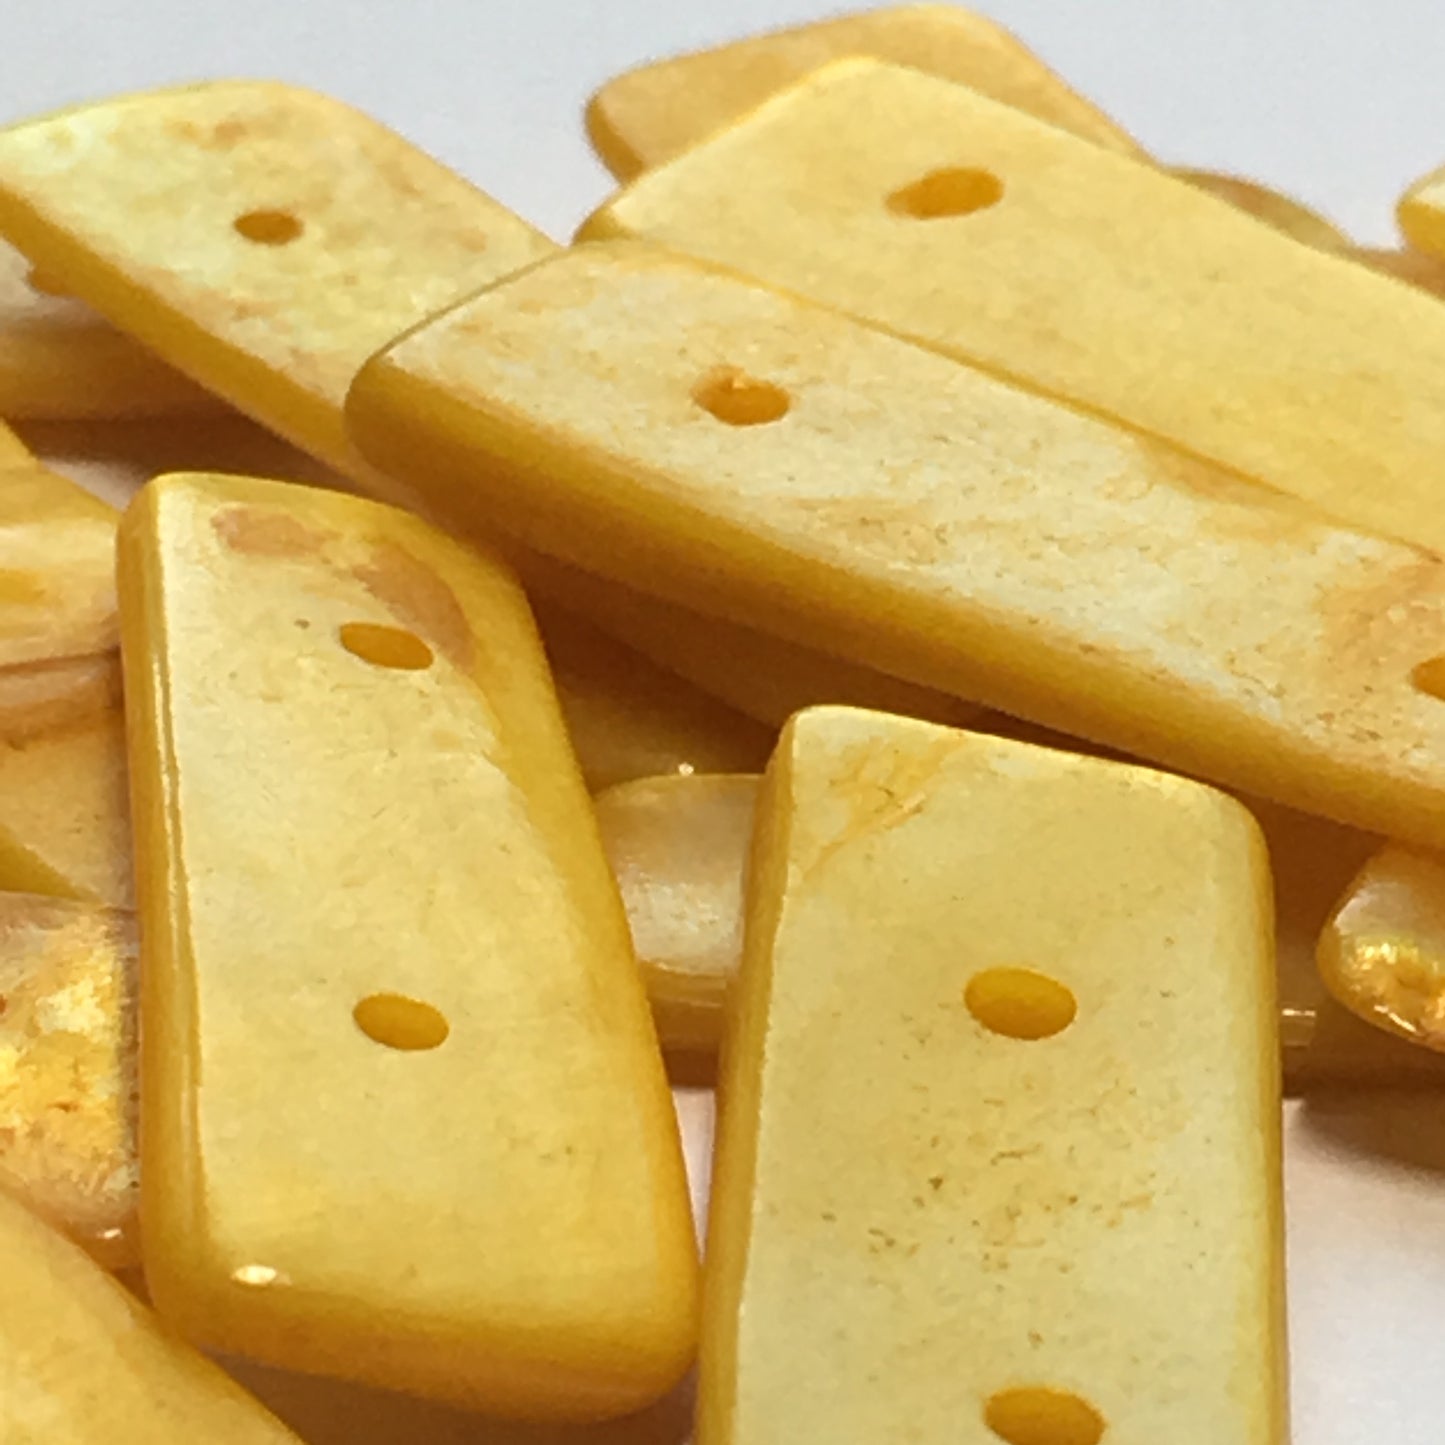 Yellow Dyed Shell Flat Rectangle Beads, Two-Strand, Front Drilled, 26-27 x 8-10 mm Average Size, 16 or 20 Beads